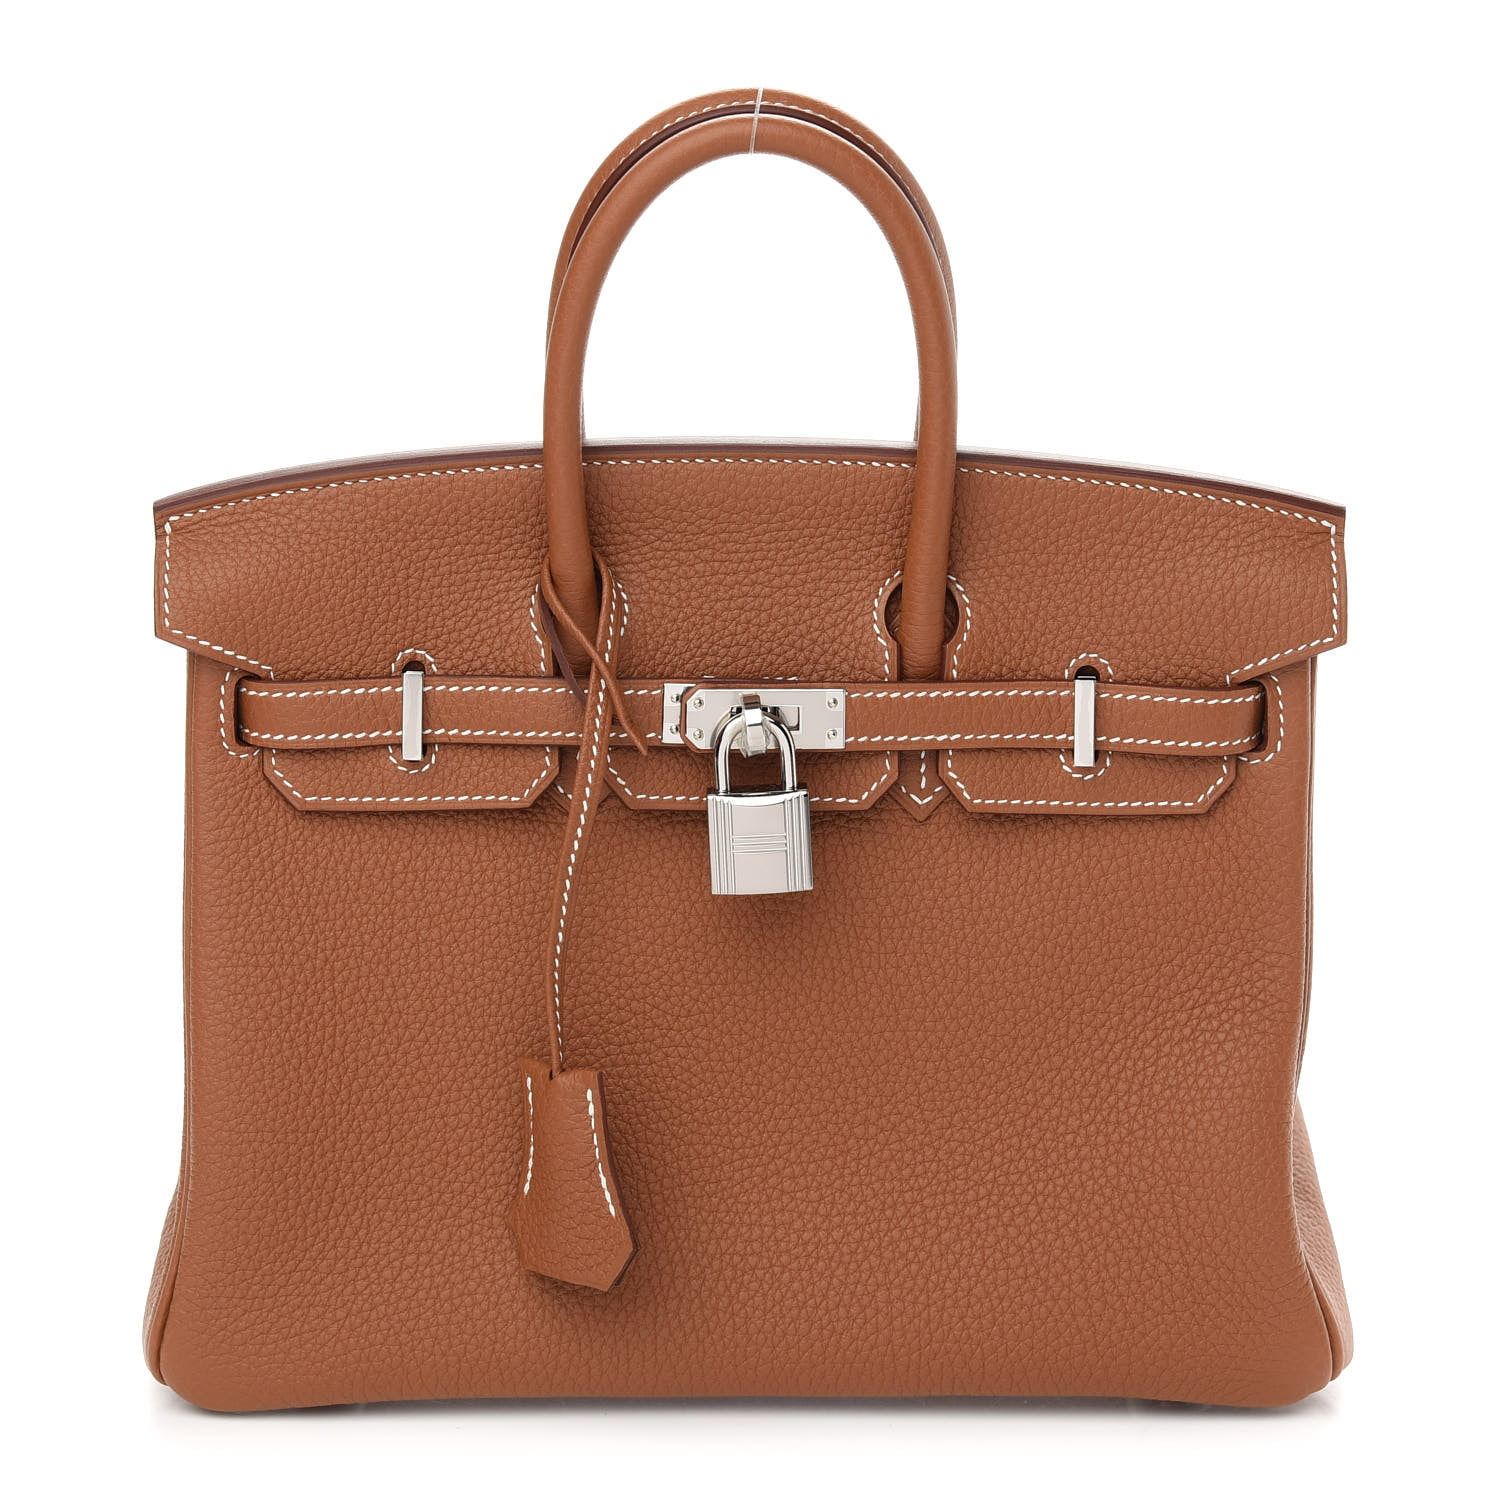 Hermes Birkin 30 in Evercolor Leather Etoupe available now! #birkin #l